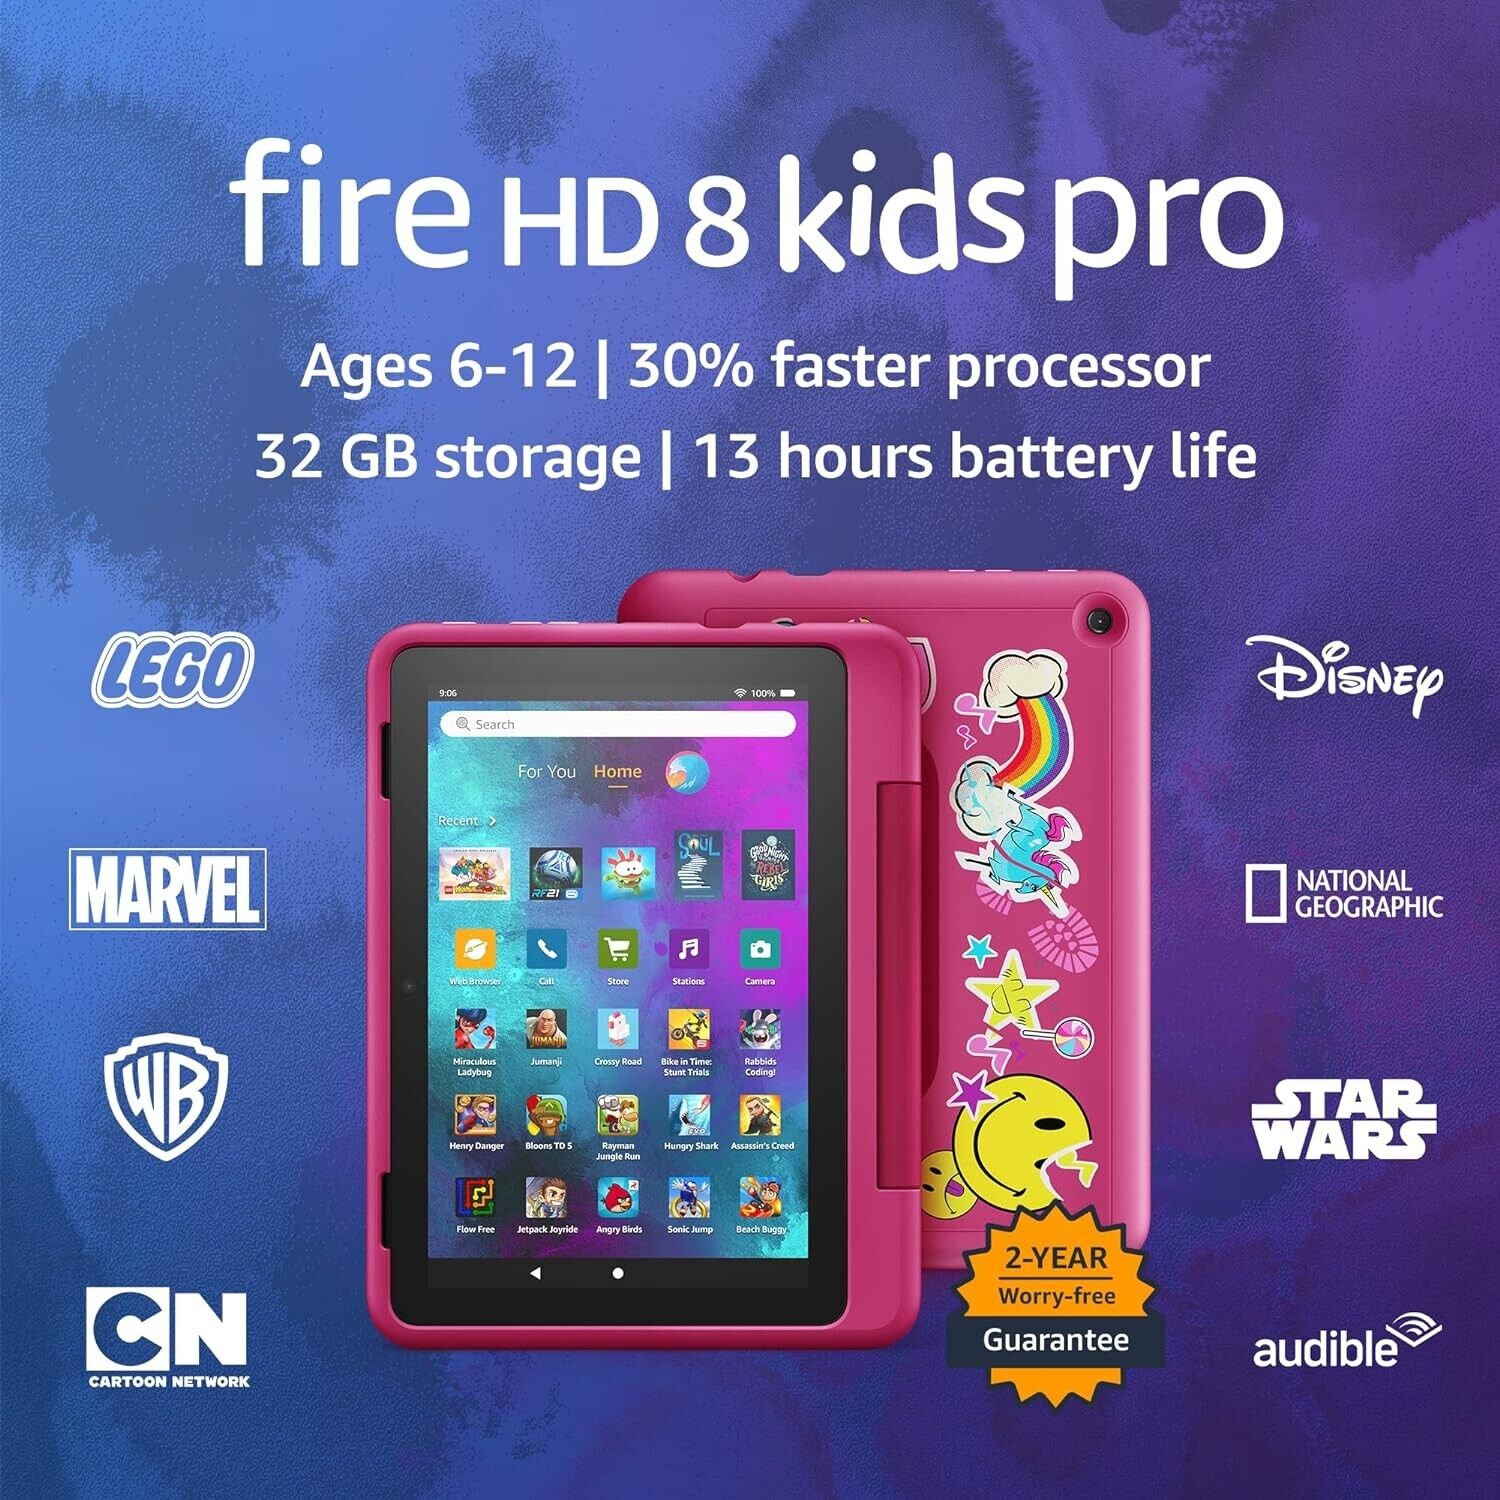 Amazon Fire HD 8 Kids Pro tablet- 2022, ages 6-12 32 GB, Rainbow Universe